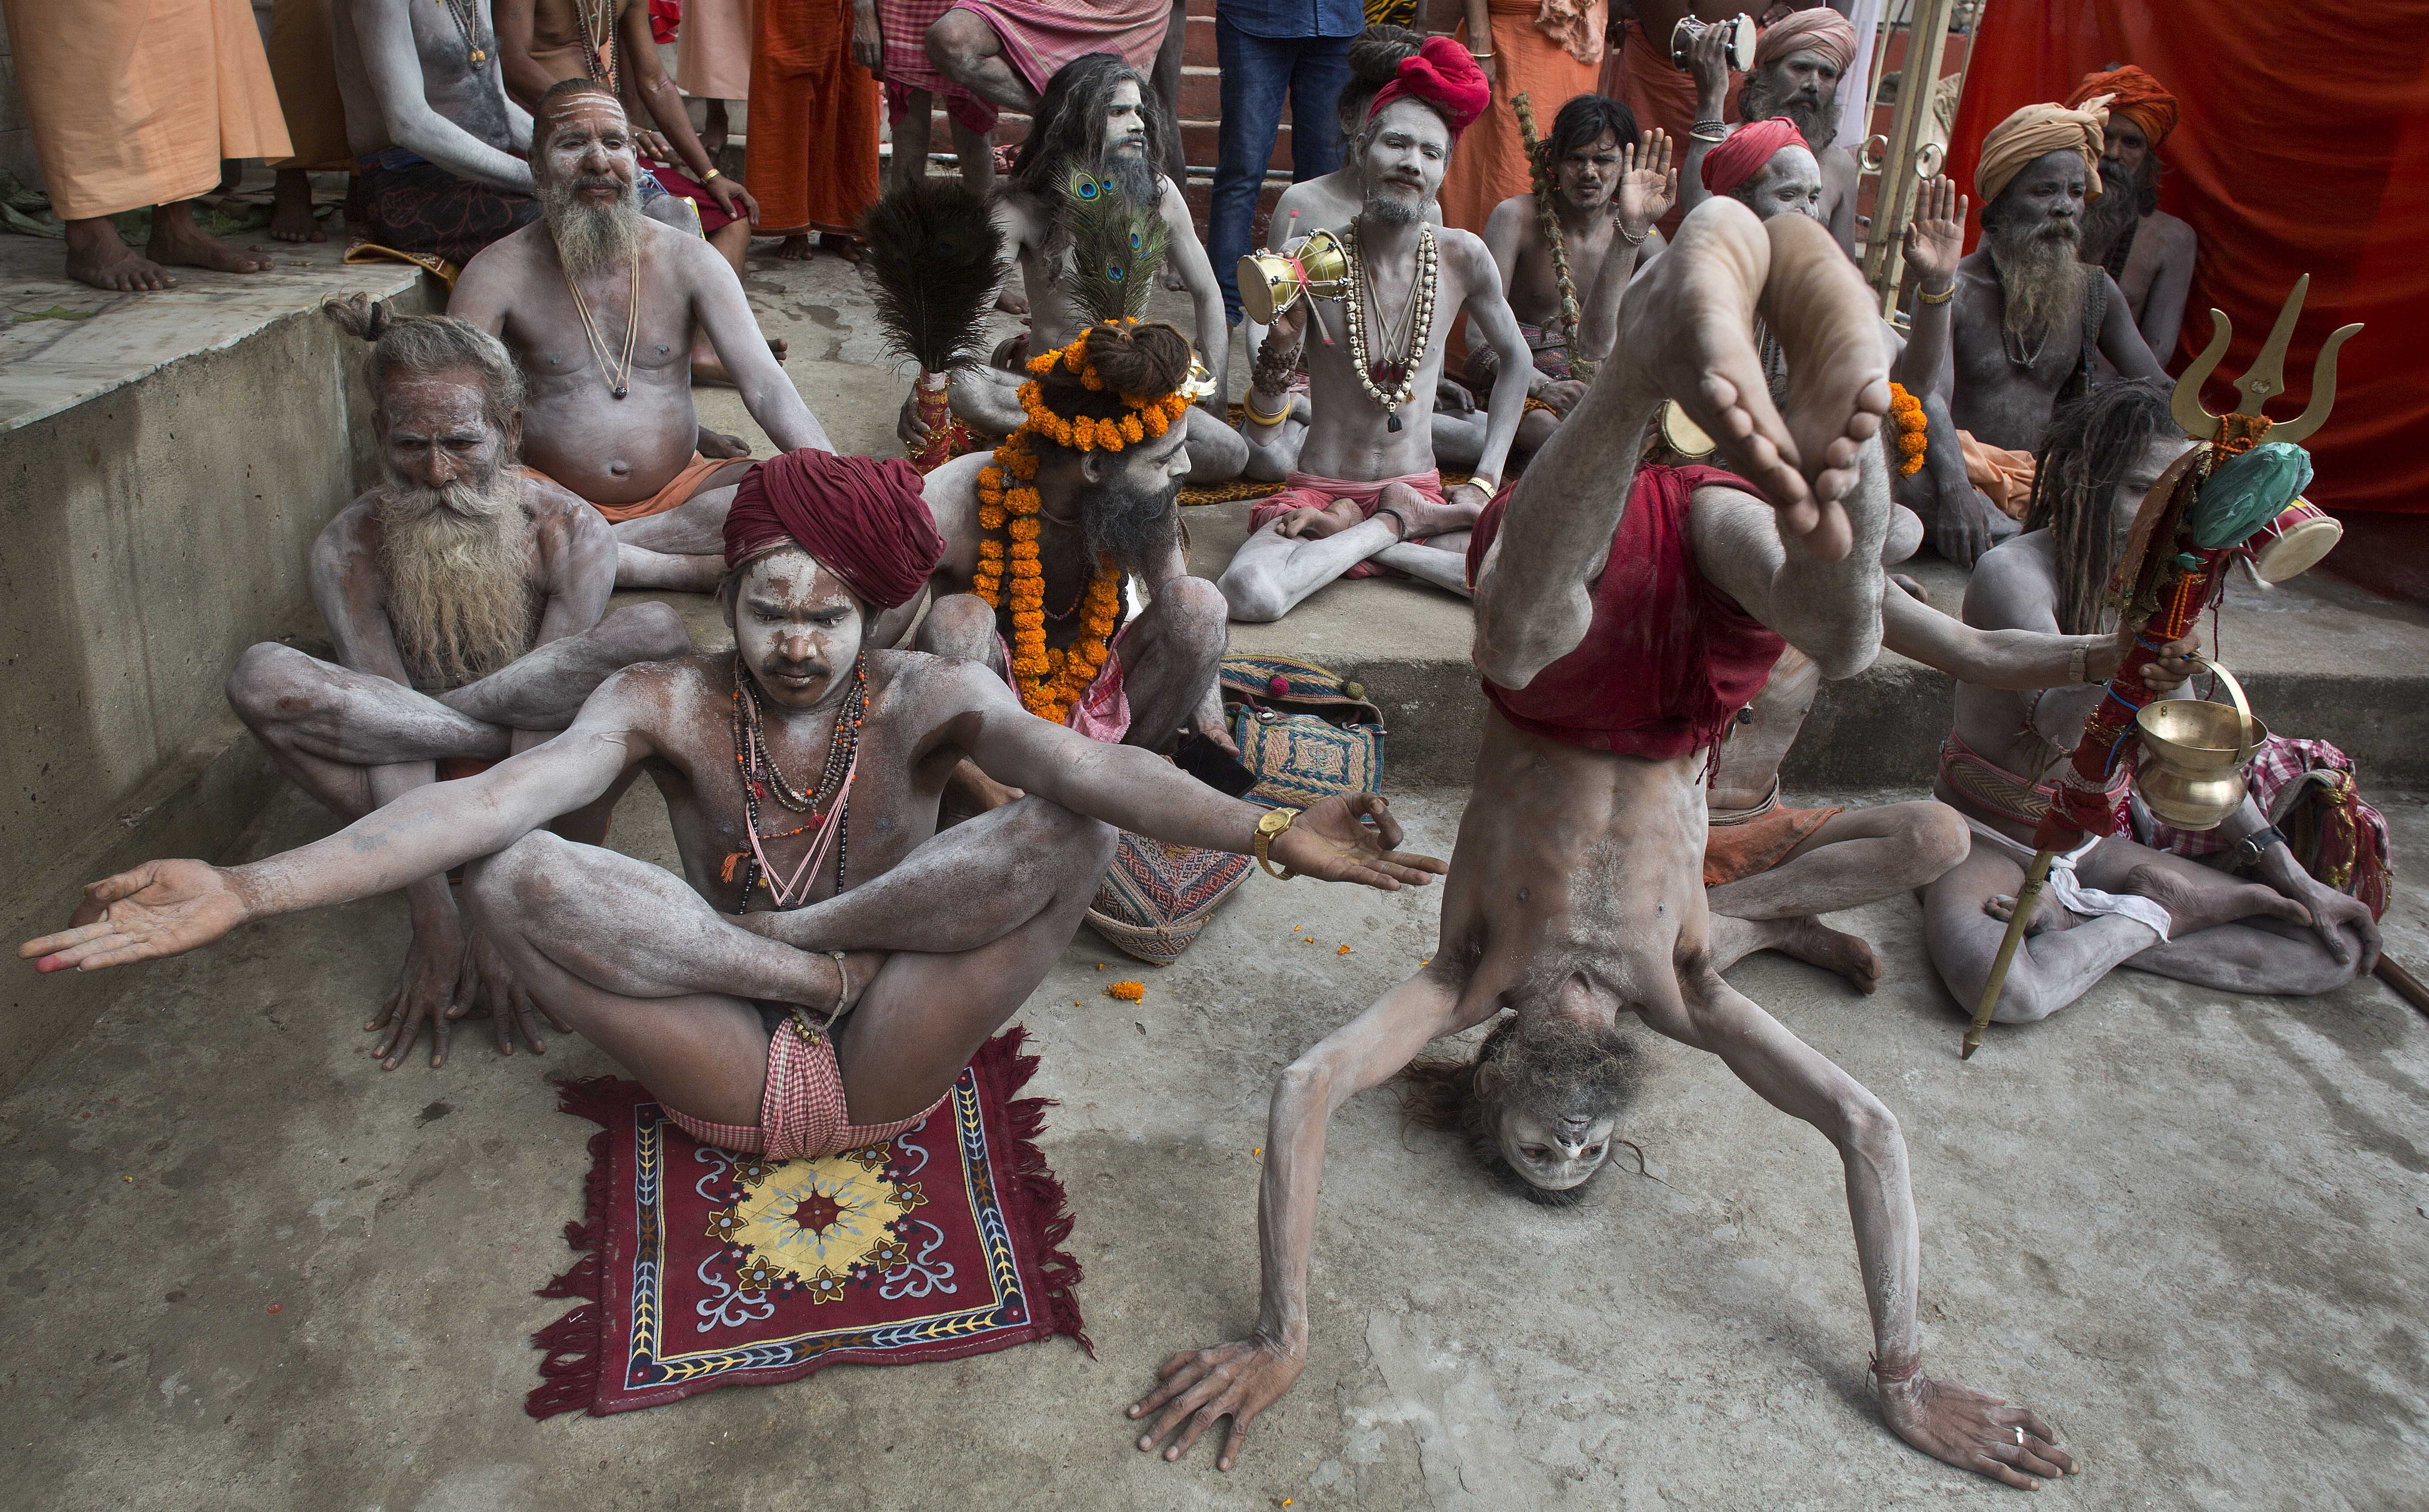 Indian Sadhus or Hindu holy men perform Yoga to mark the International Yoga Day at Kamakhya temple in Gauhati, India , Wednesday, June 21, 2017. Yoga practitioners took a relaxing break to bend, twist and pose Wednesday morning for the annual event celebrating the practice, especially in the country where it began. (AP Photo/Anupam Nath)